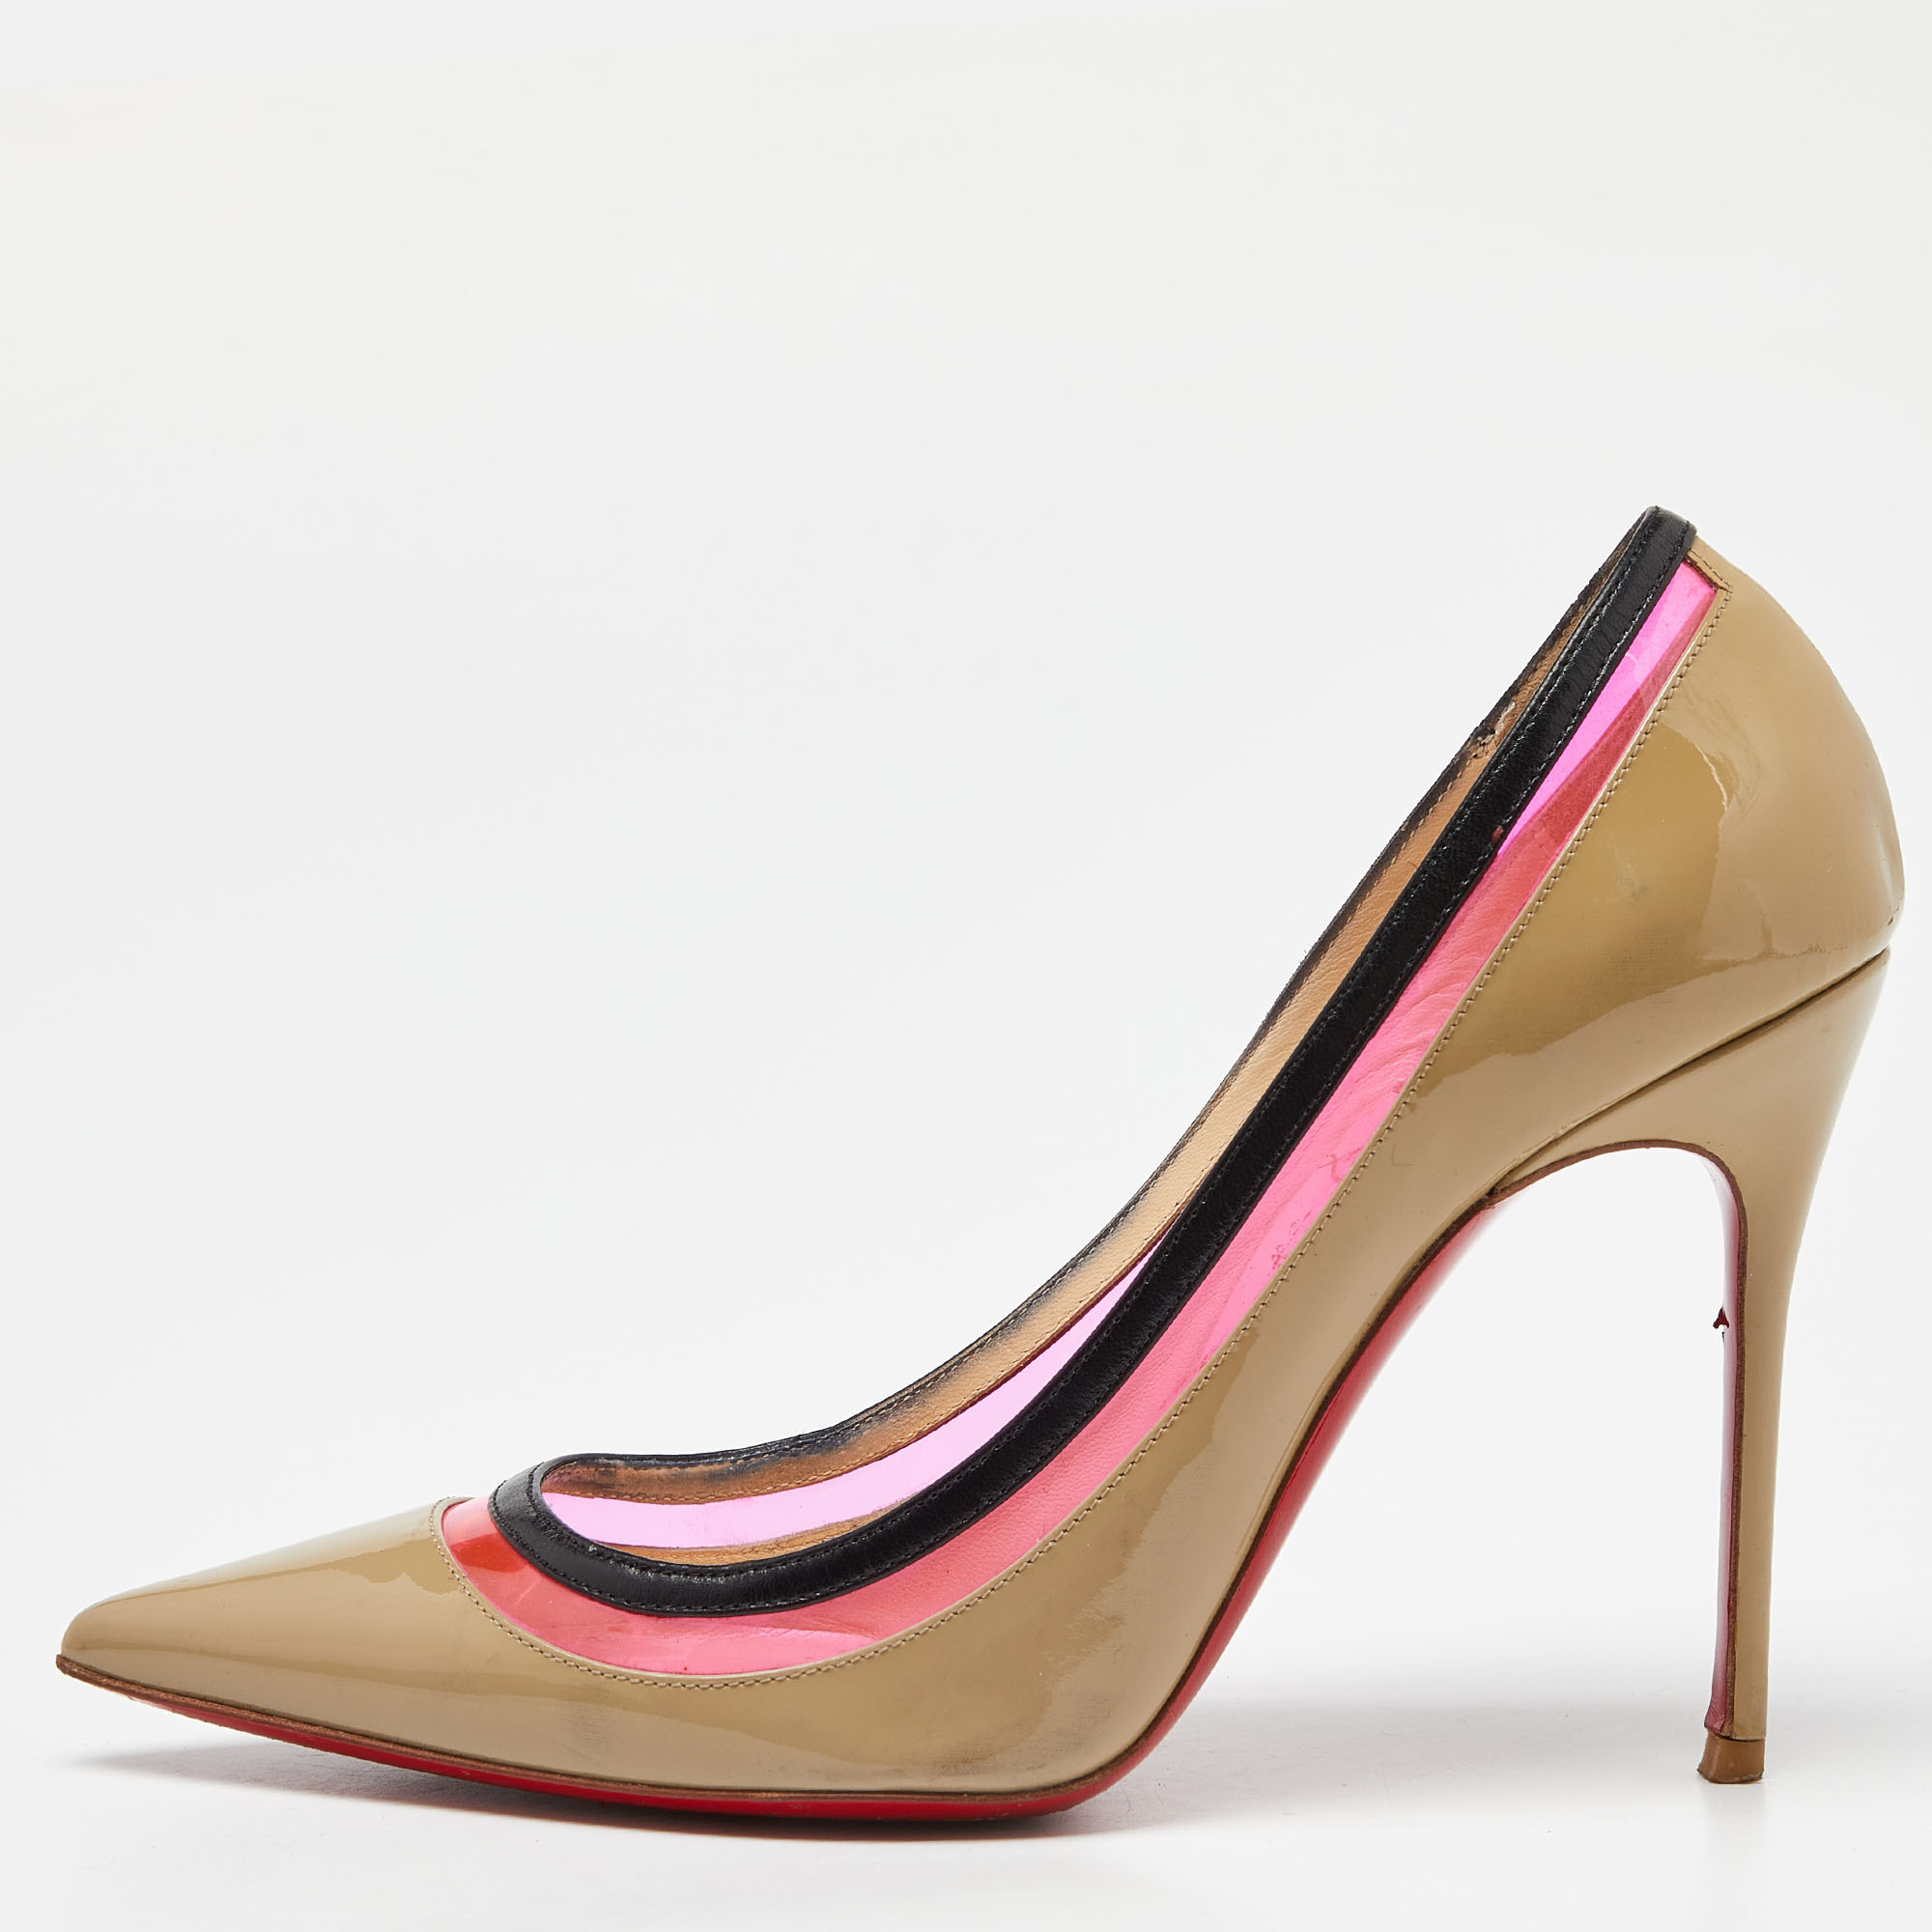 Christian Louboutin Beige/Pink Patent Leather and PVC Paulina Pumps Size 36